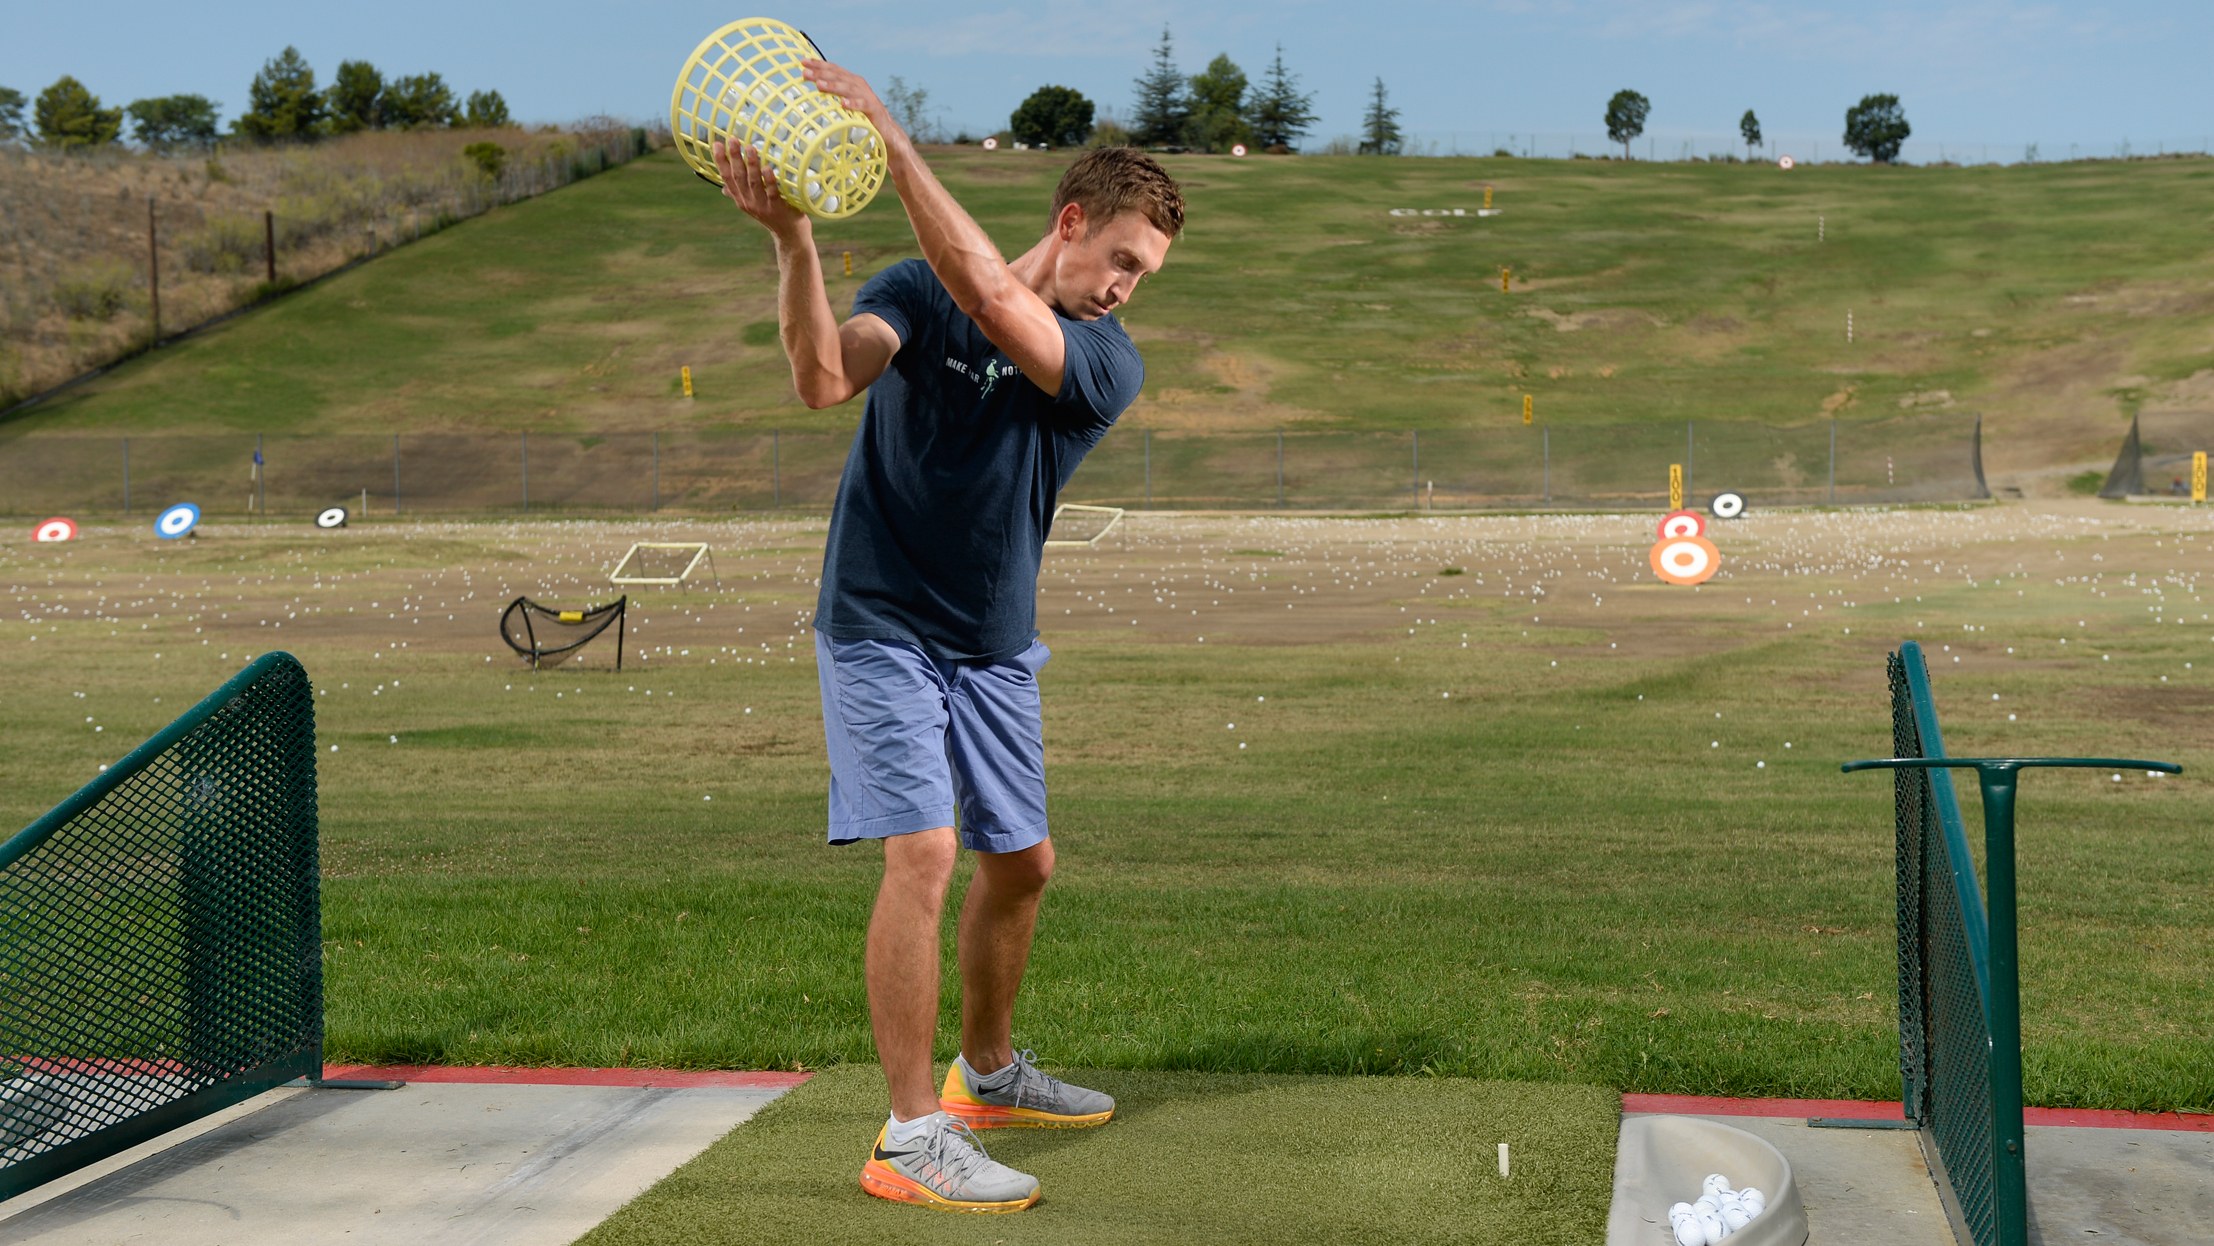 5-Minute Clinic: Streamline Your Practice Sessions - Golf Digest